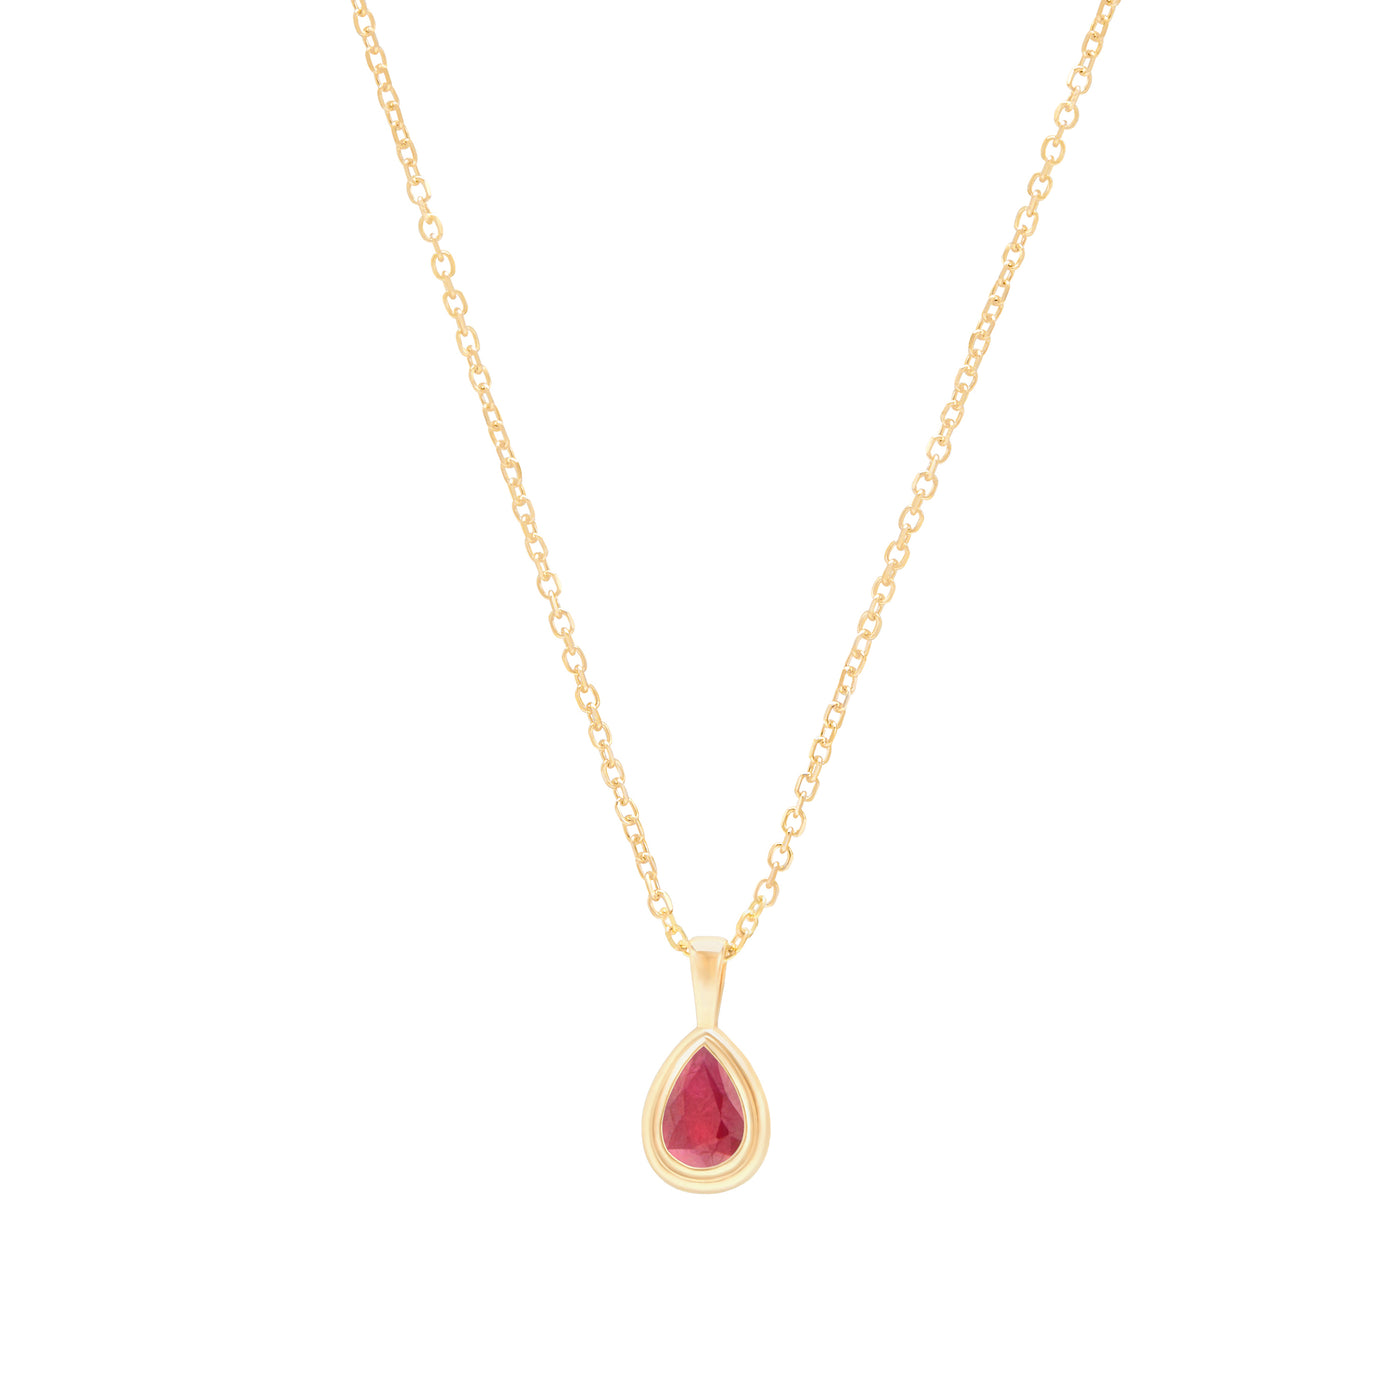 Ruby pear shaped pendant in yellow gold on cable chain on white background